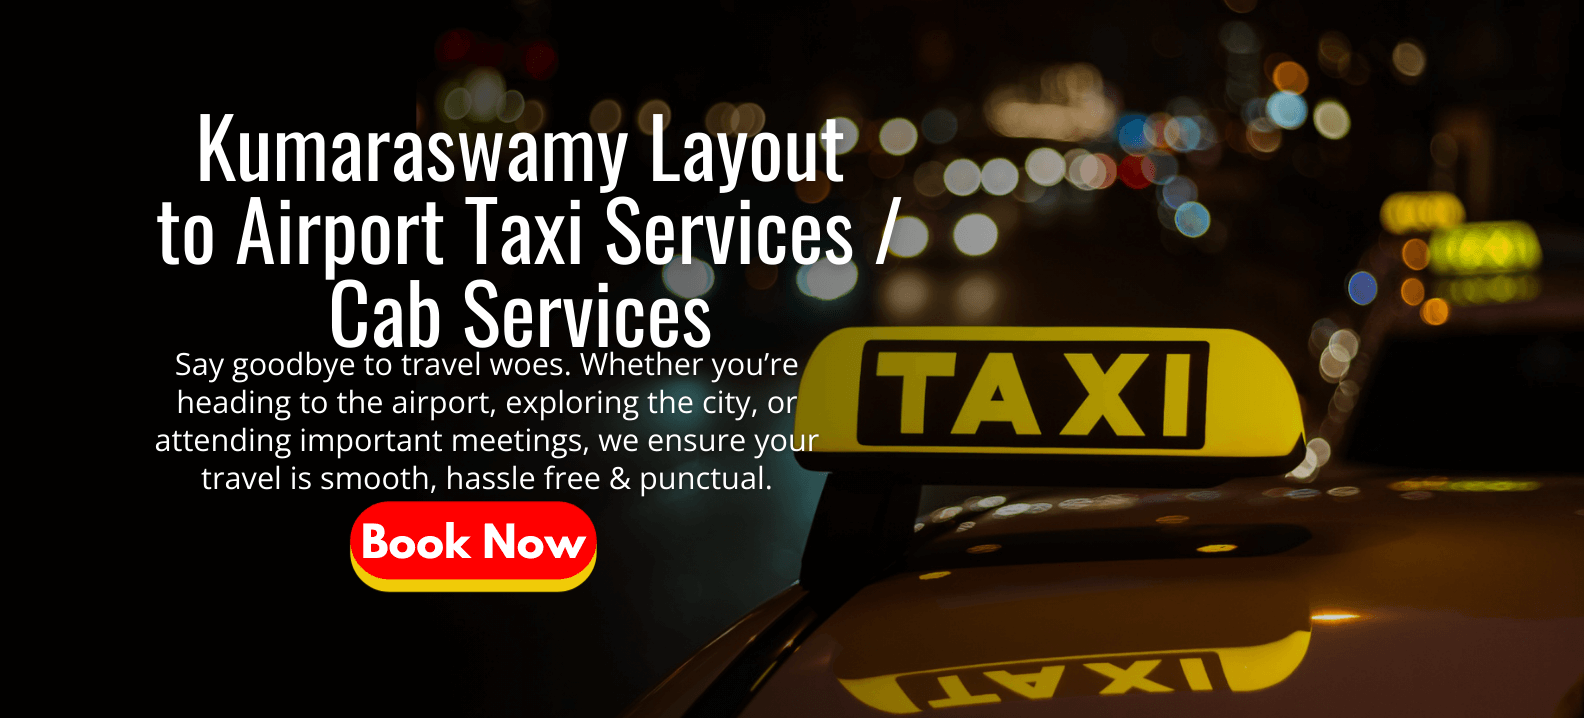 Kumaraswamy Layout to Airport Taxi Services _ Cab Services